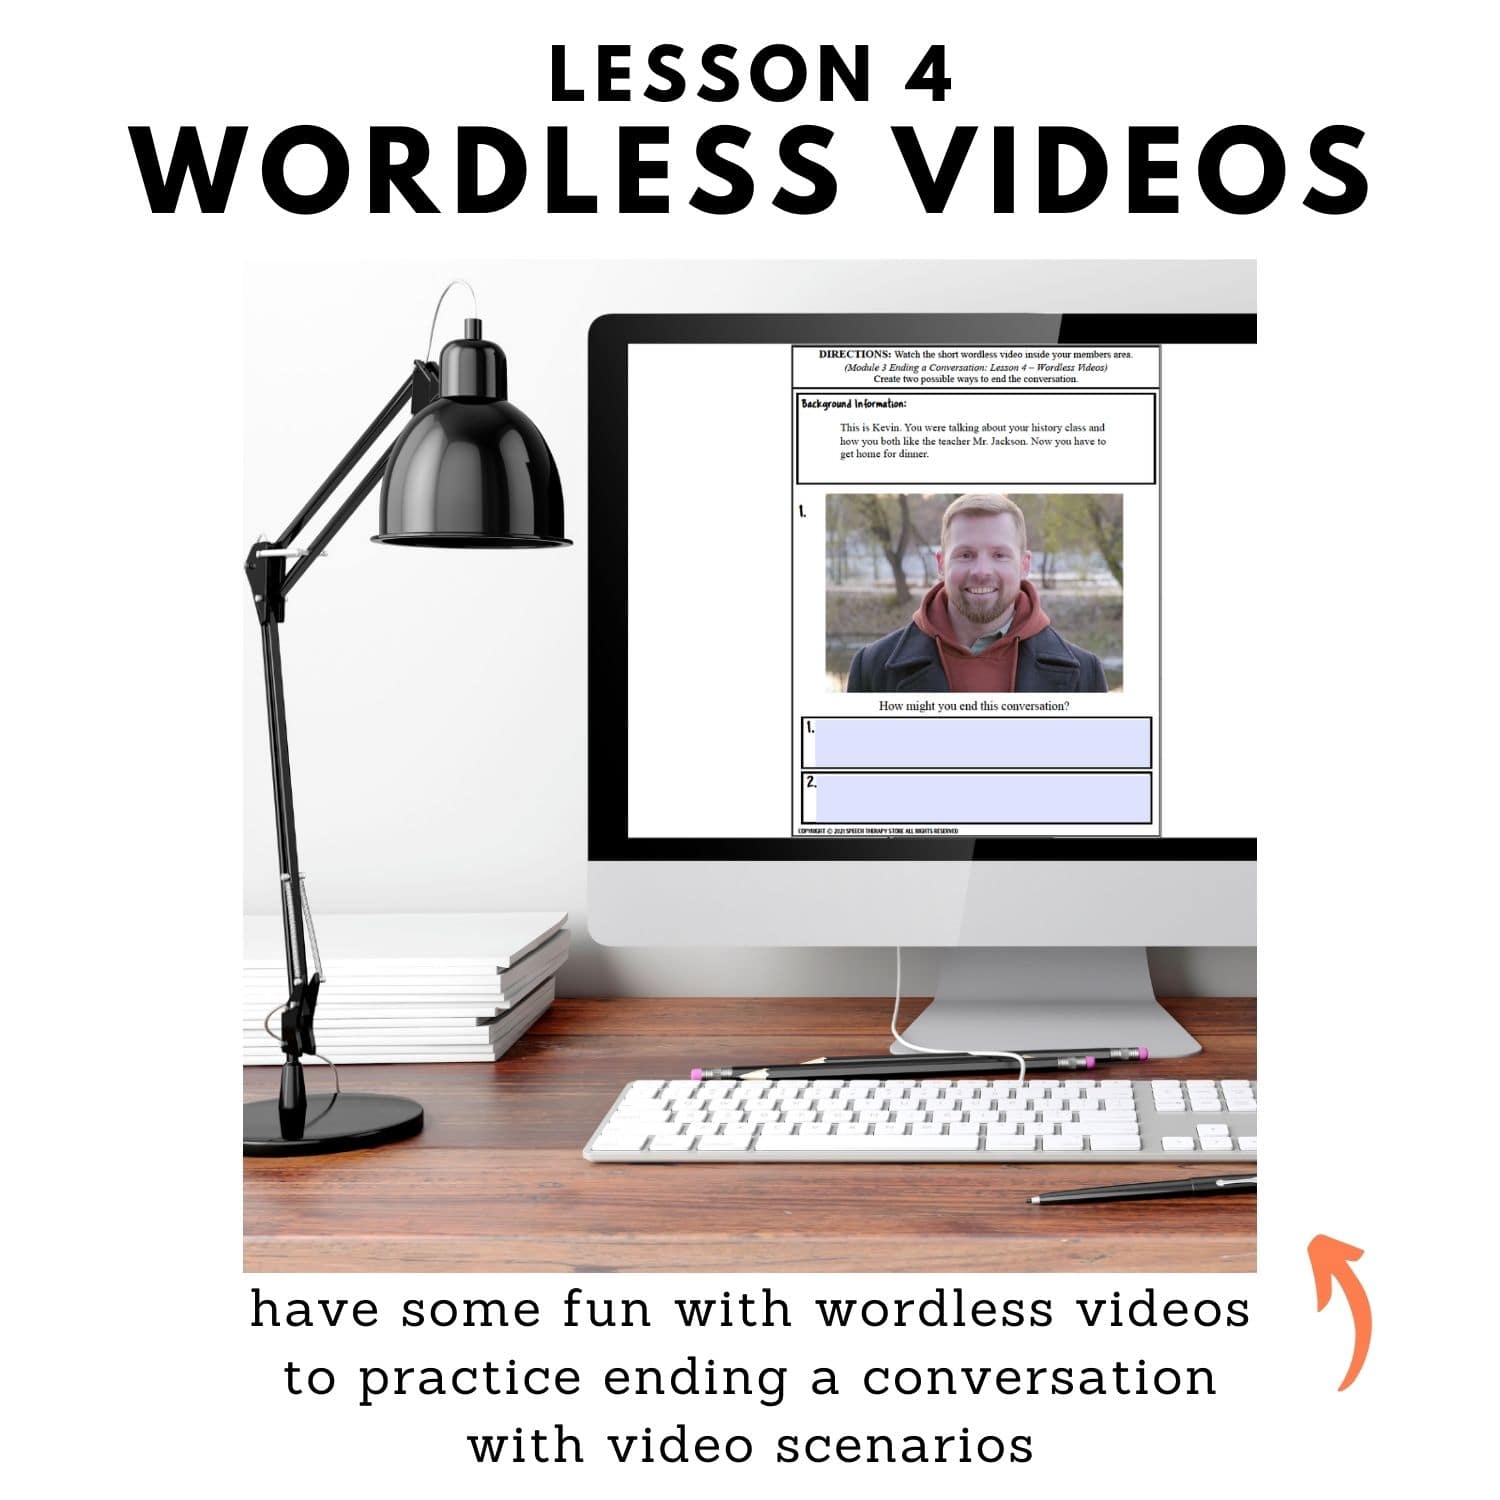 wordless videos for ending a conversation